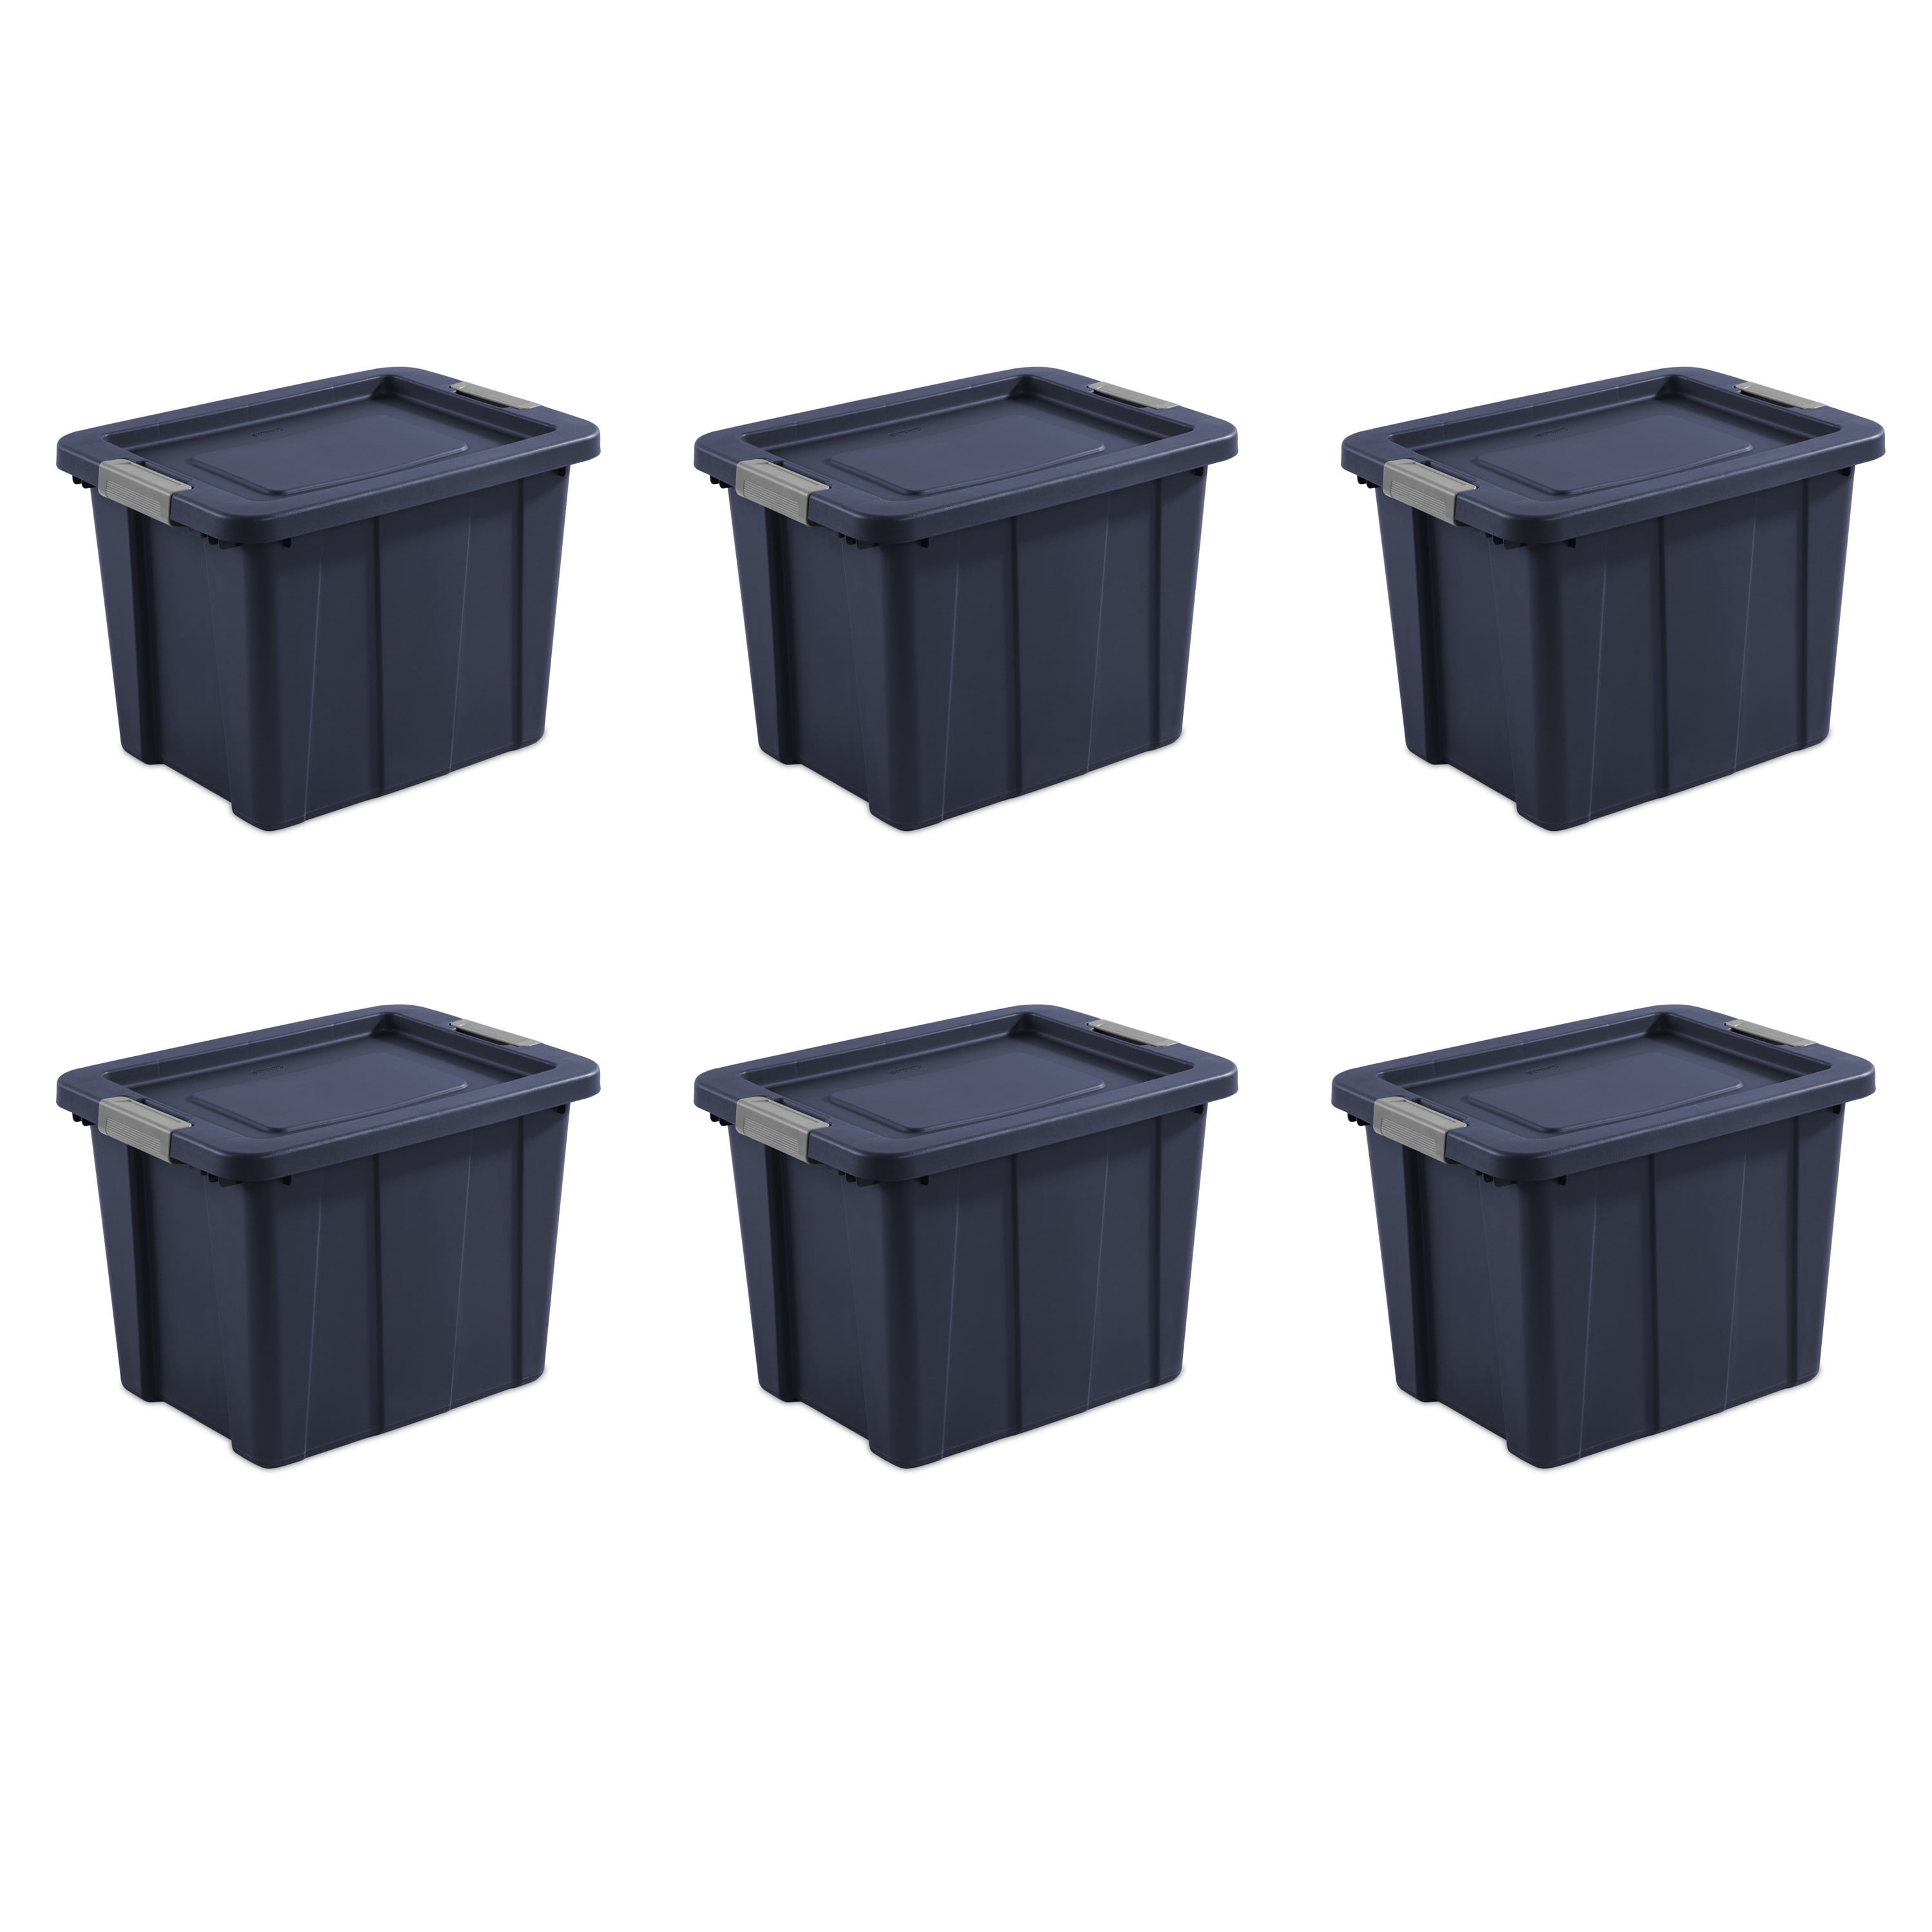 Sterilite 18 Gallon Tuff1 Storage Tote, Stackable Bin with Lid, Plastic  Container to Organize Garage, Basement, Attic, Gray Base and Lid, 6-Pack